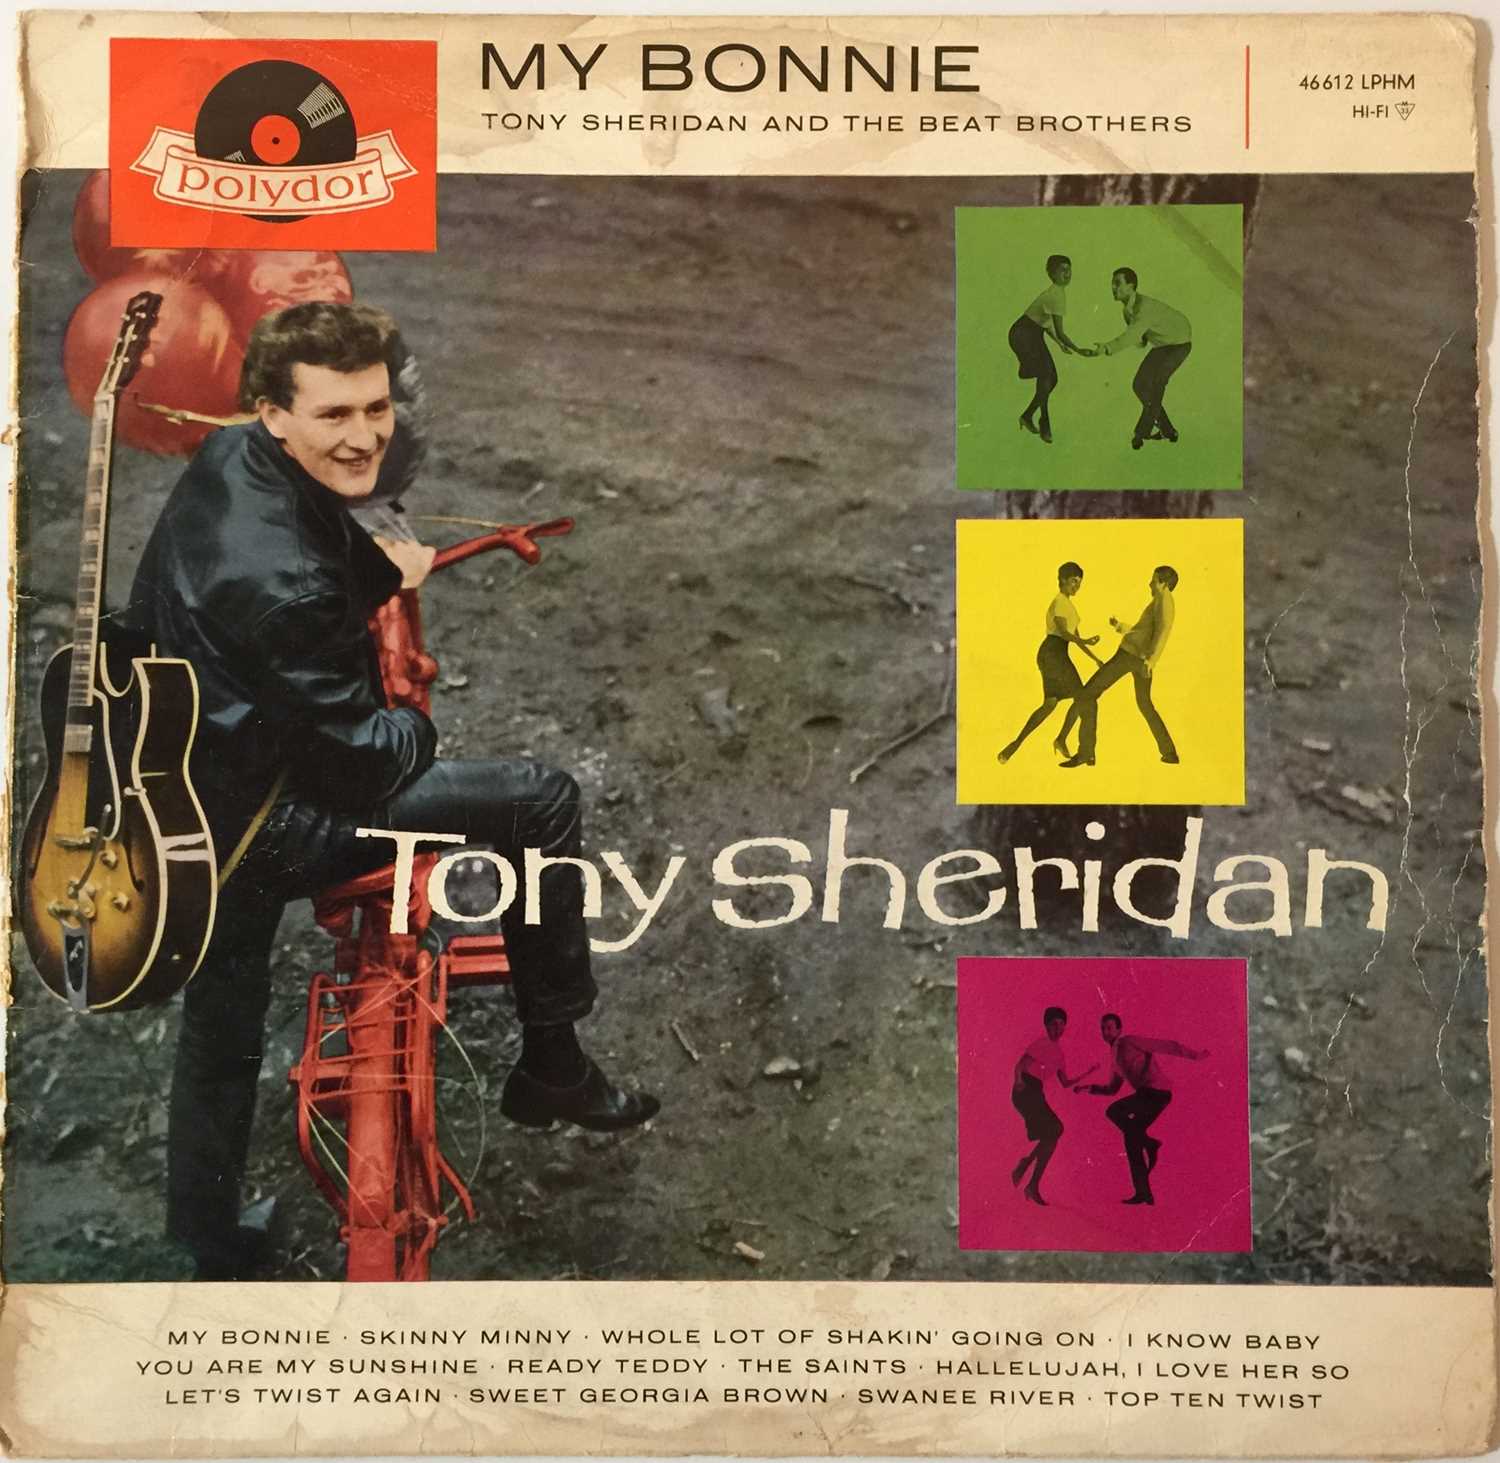 Lot 36 - TONY SHERIDAN AND THE BEAT BROTHERS (THE BEATLES) - MY BONNIE LP (ORIGINAL GERMAN PRESSING - POLYDOR LPHM 46 612)